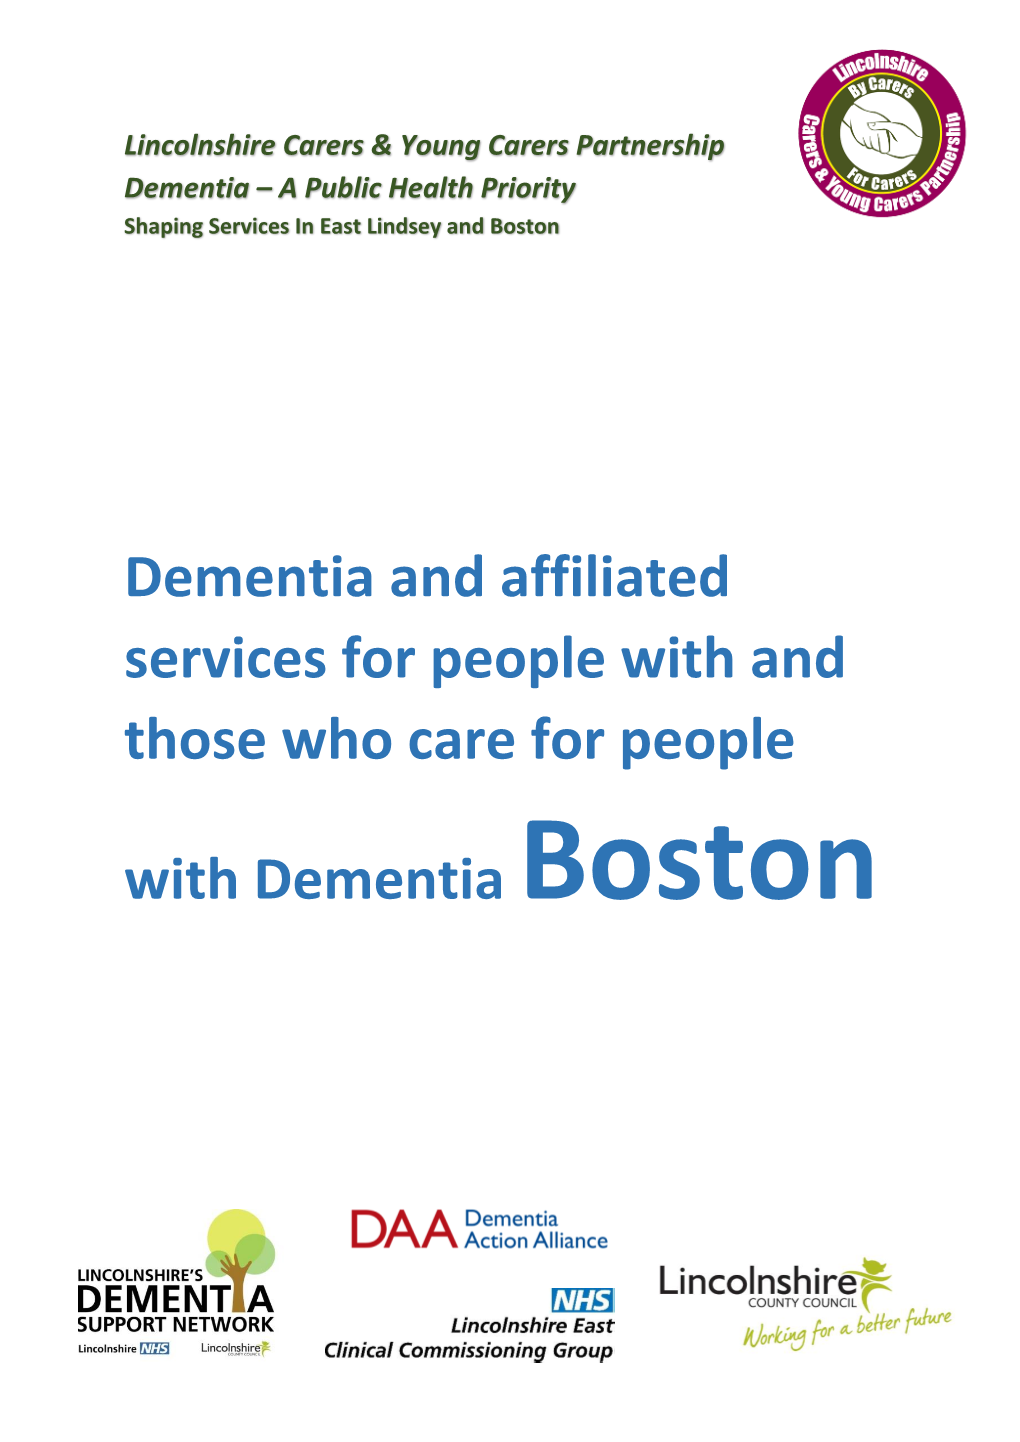 Dementia and Affiliated Services for People with and Those Who Care for People with Dementia Boston